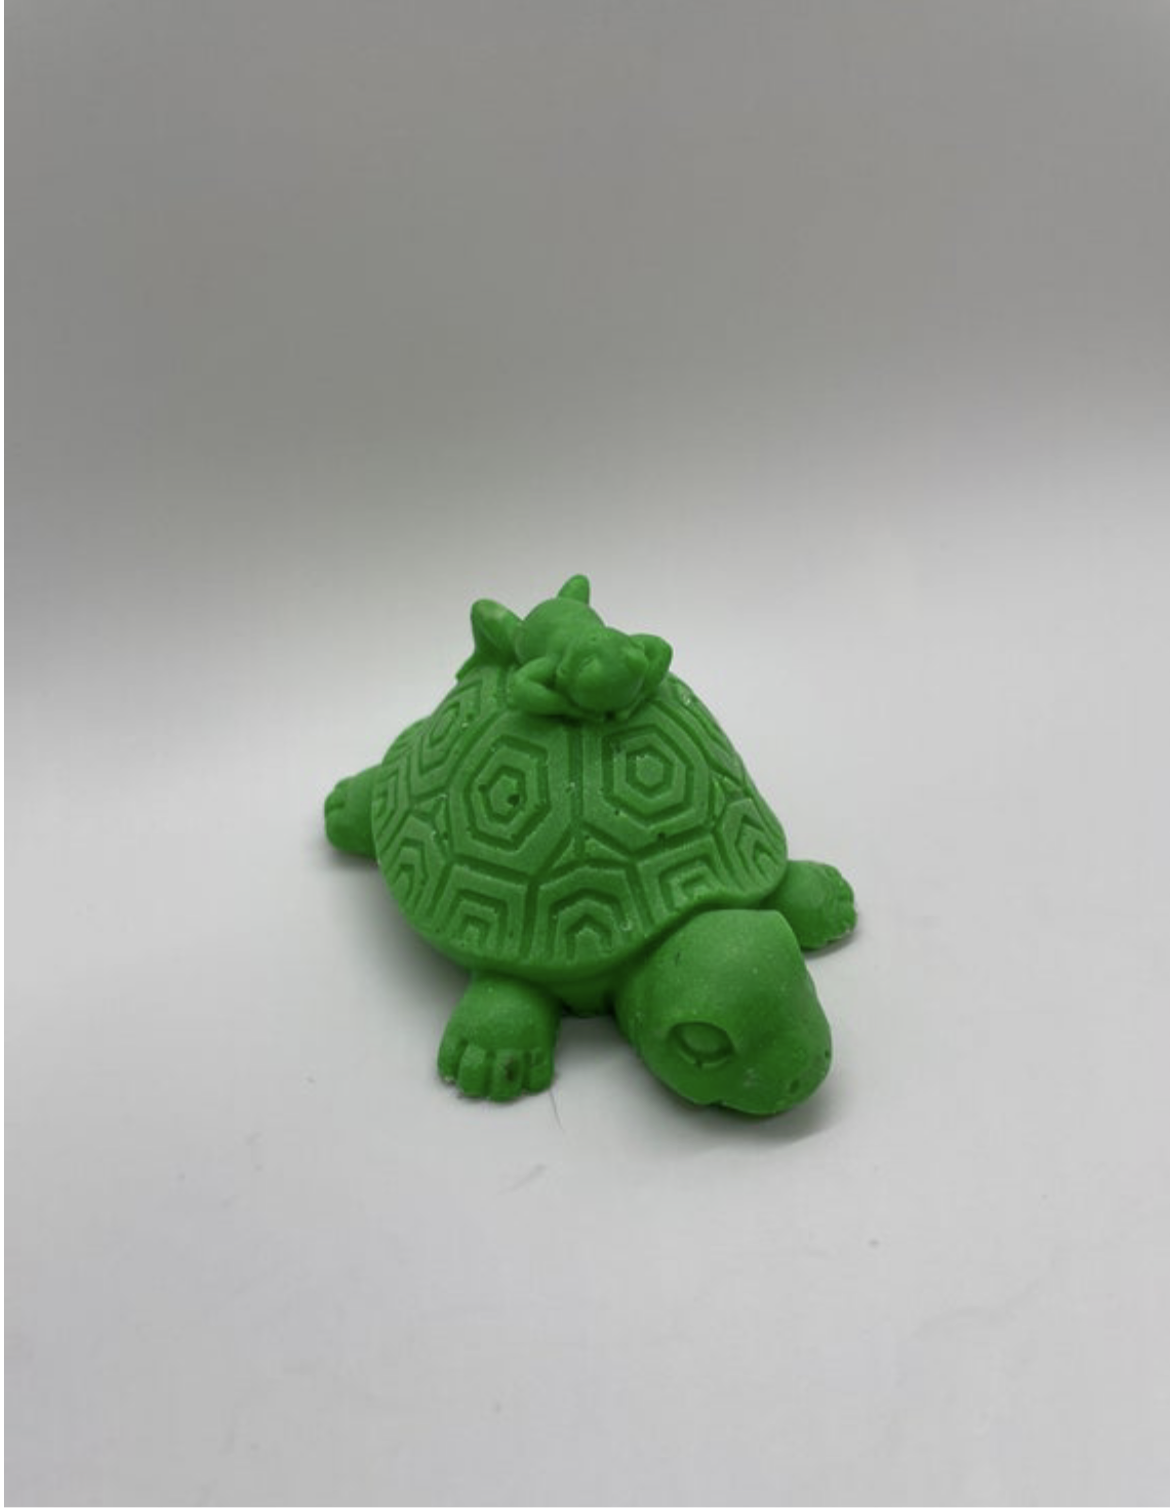 Turtle and Frog Soap Bar VARIES IN COLORS